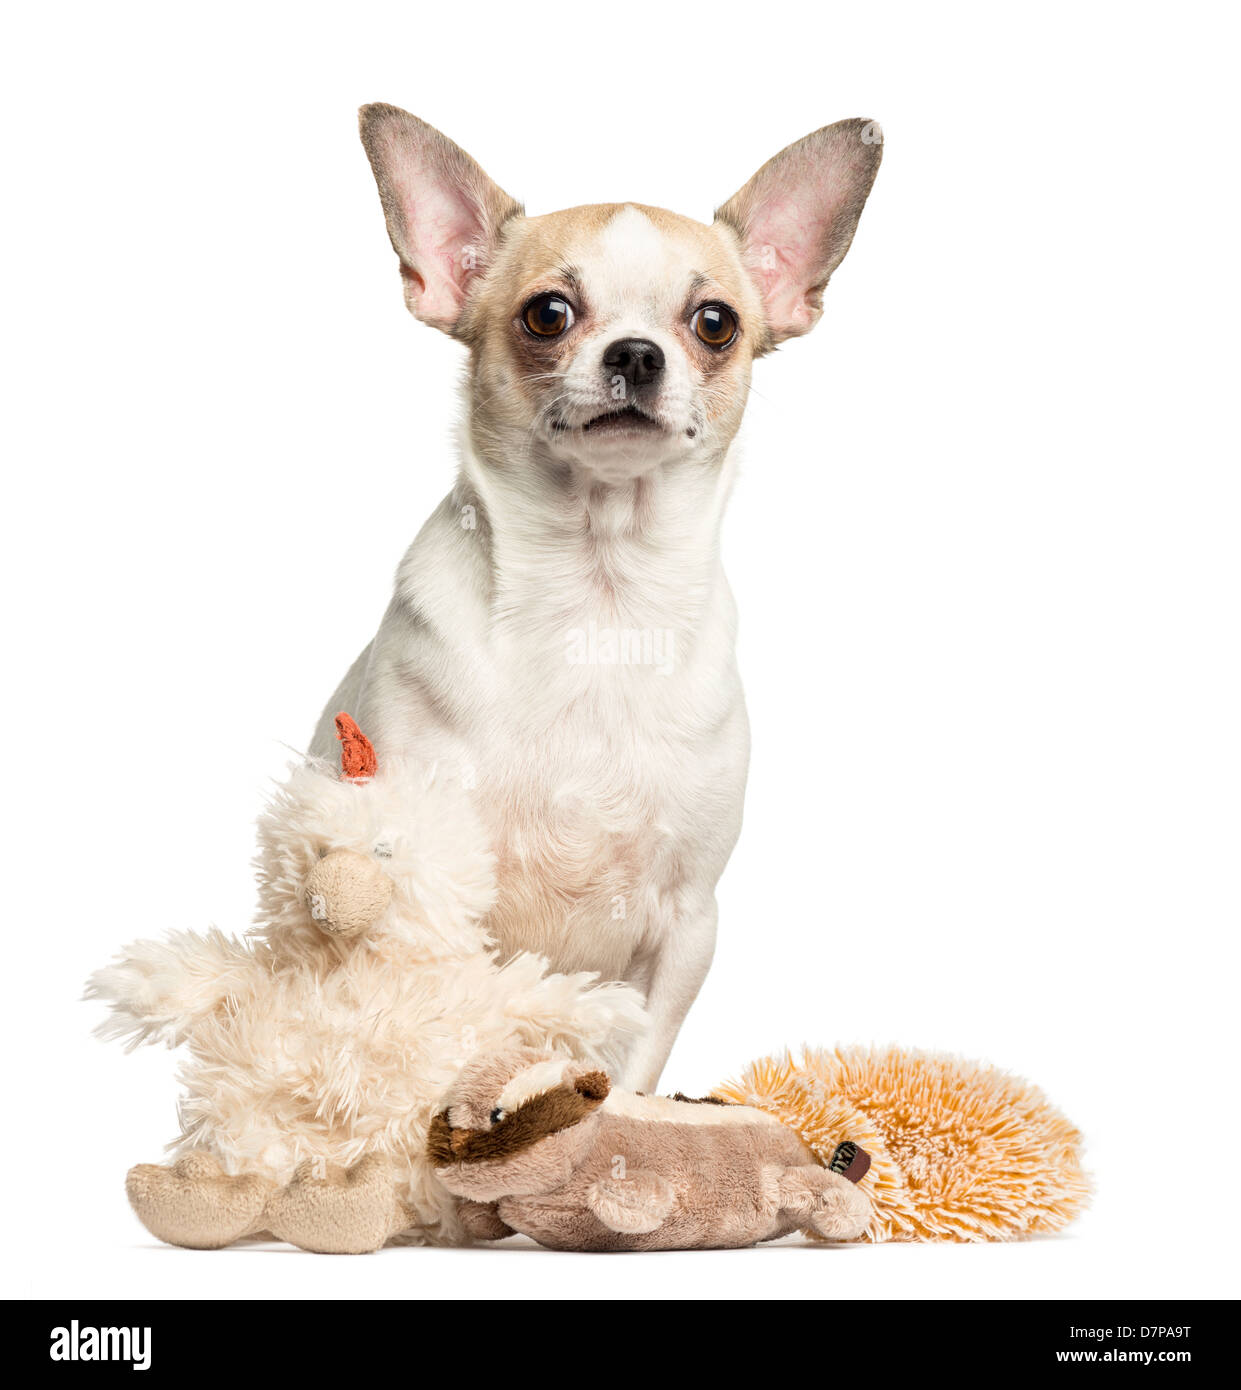 Chihuahua, 2 years old, sitting with stuffed toys against white background Stock Photo